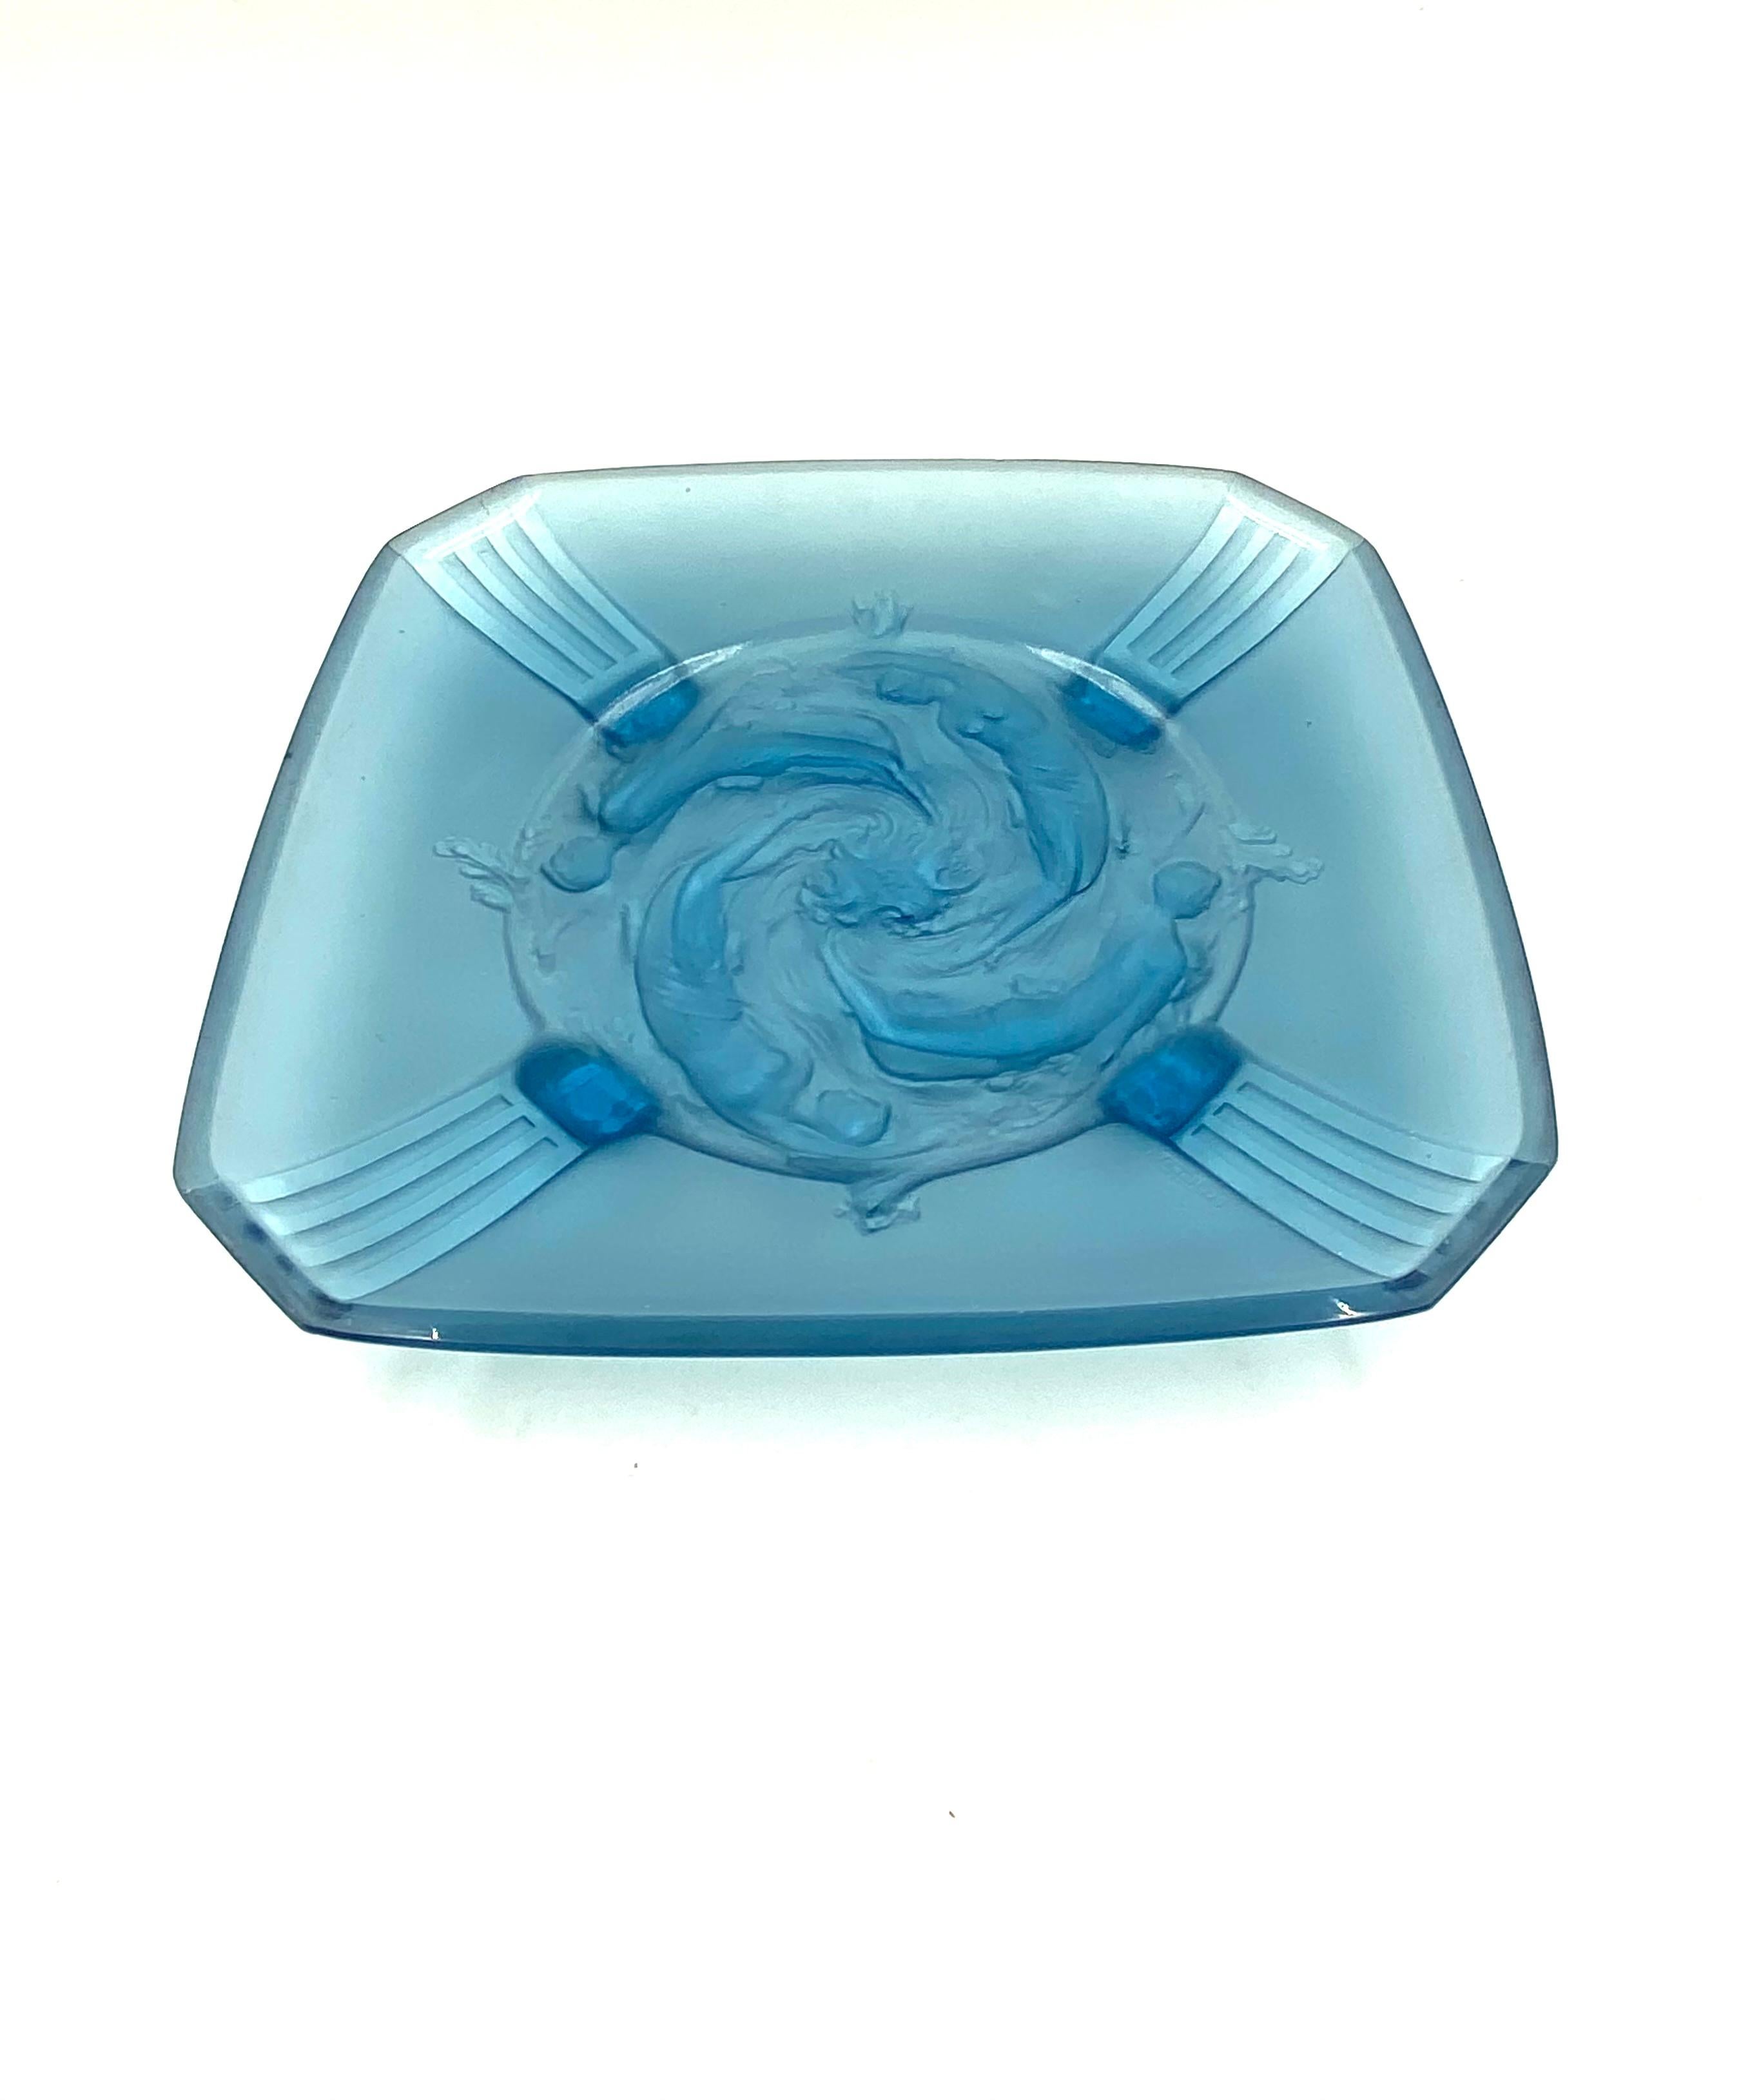 Verreries Des Hanots, Important 'Naiads' Molded Glass Tray, France, 1930s In Excellent Condition For Sale In Firenze, IT